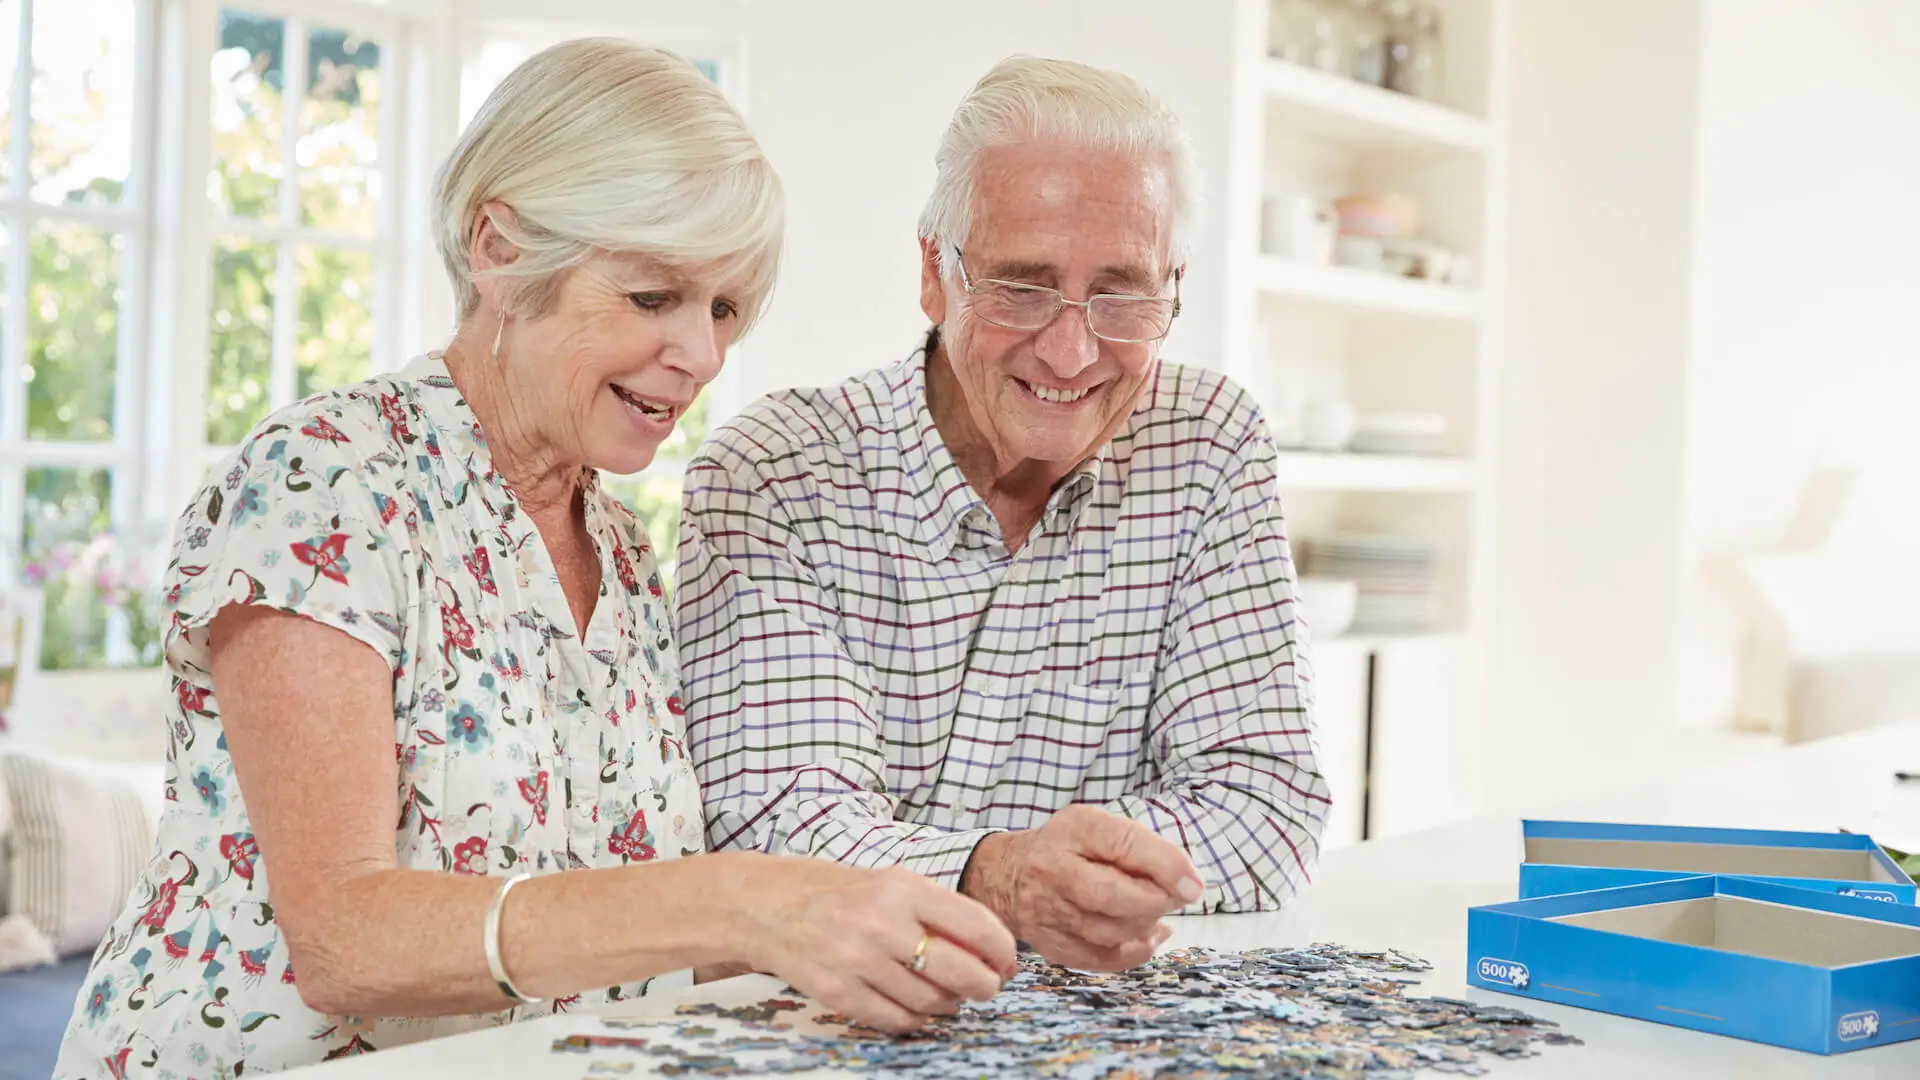 Senior couple doing a jigsaw puzzle at home